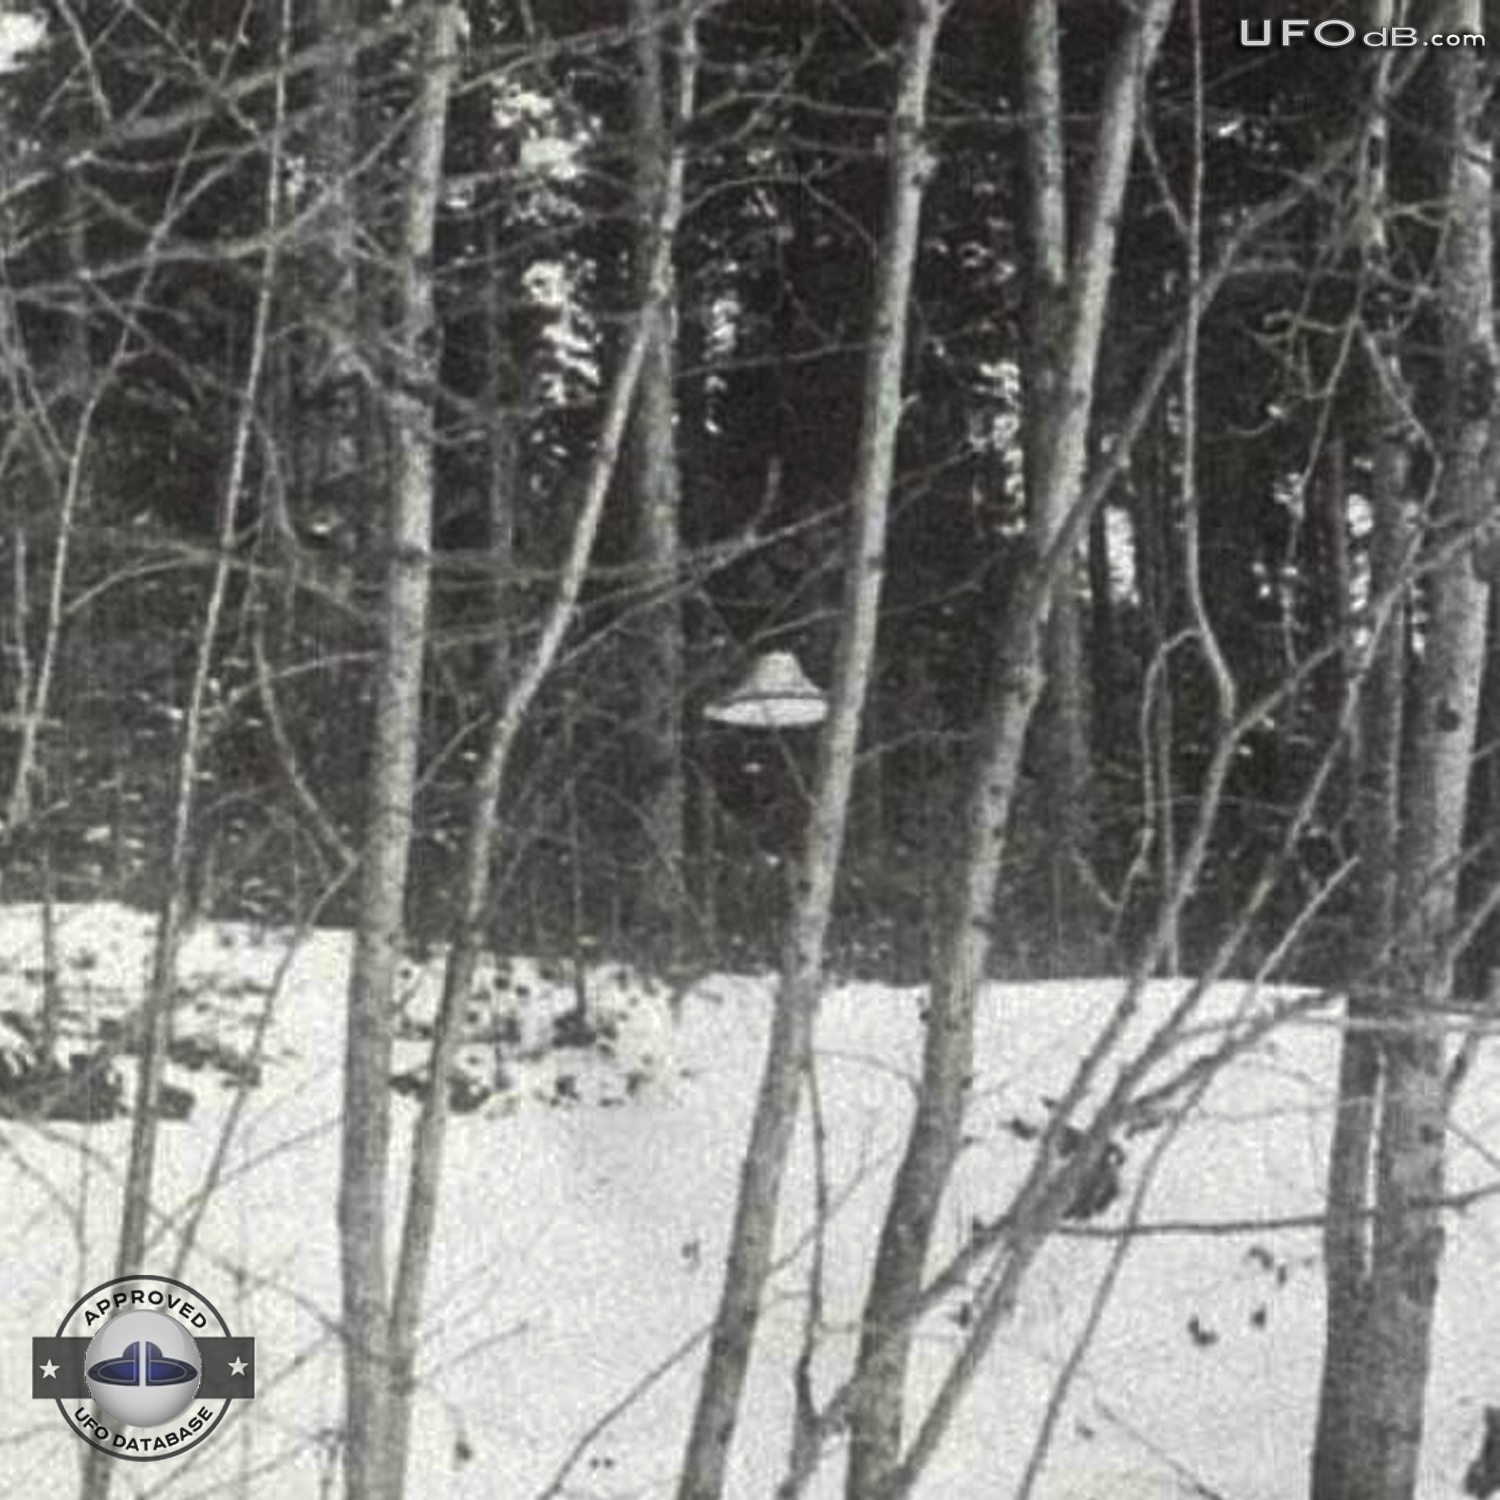 Suonenjoki UFO probe going around trees in the forest | March 16 1979 UFO Picture #336-5